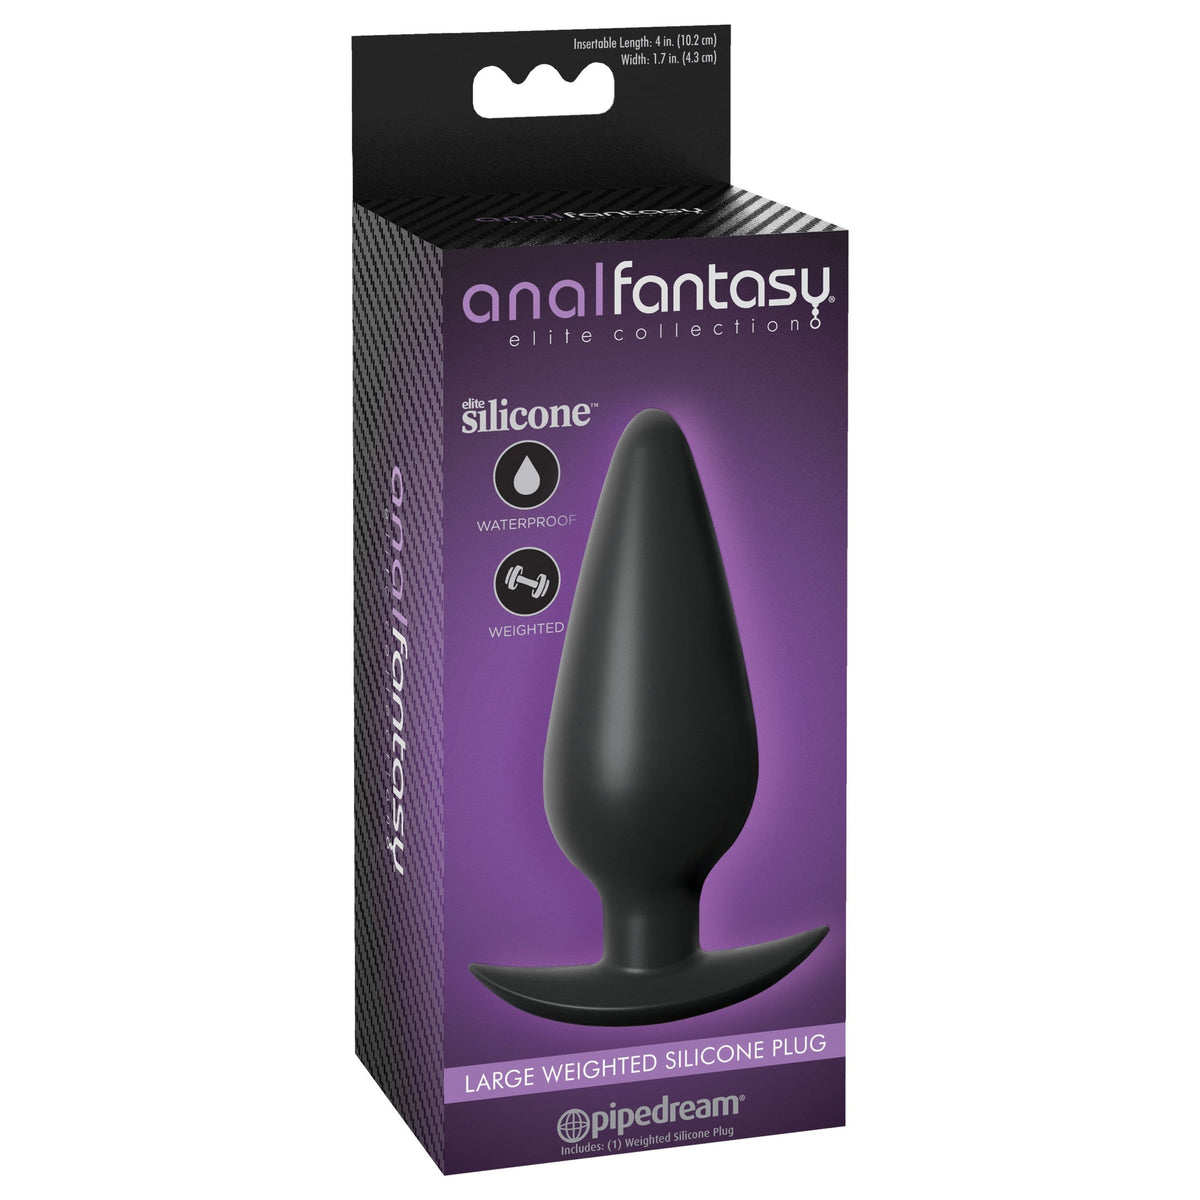 Pipedream - Anal Fantasy Elite Collection Weighted Silicone Anal Plug Large (Black) PD1729 CherryAffairs